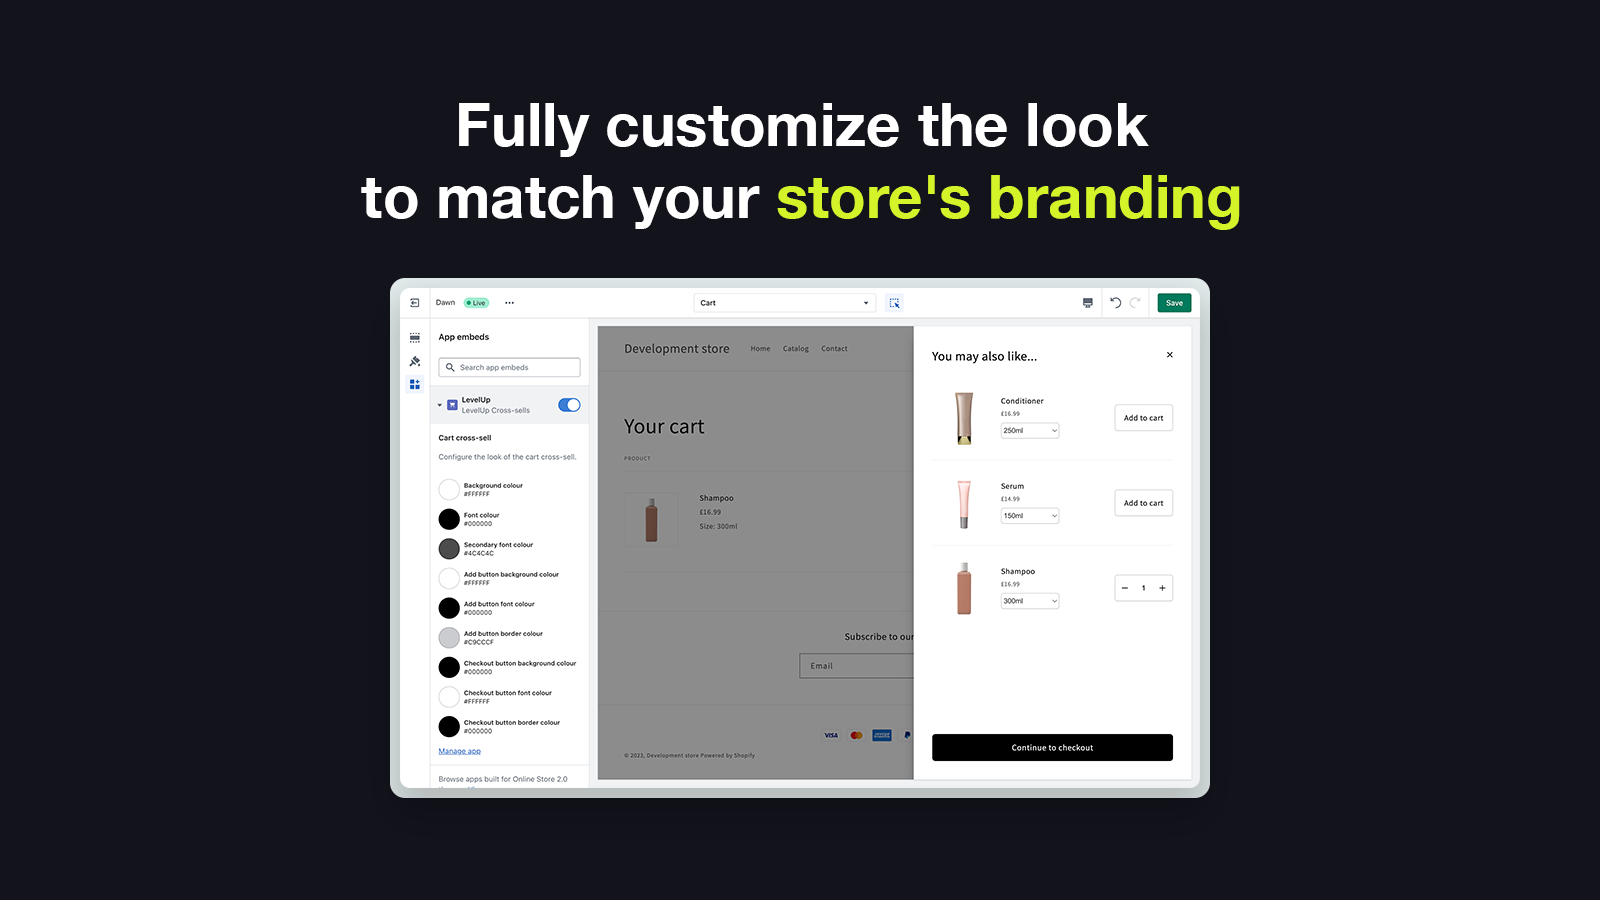 Fully customize the look to match your store's branding